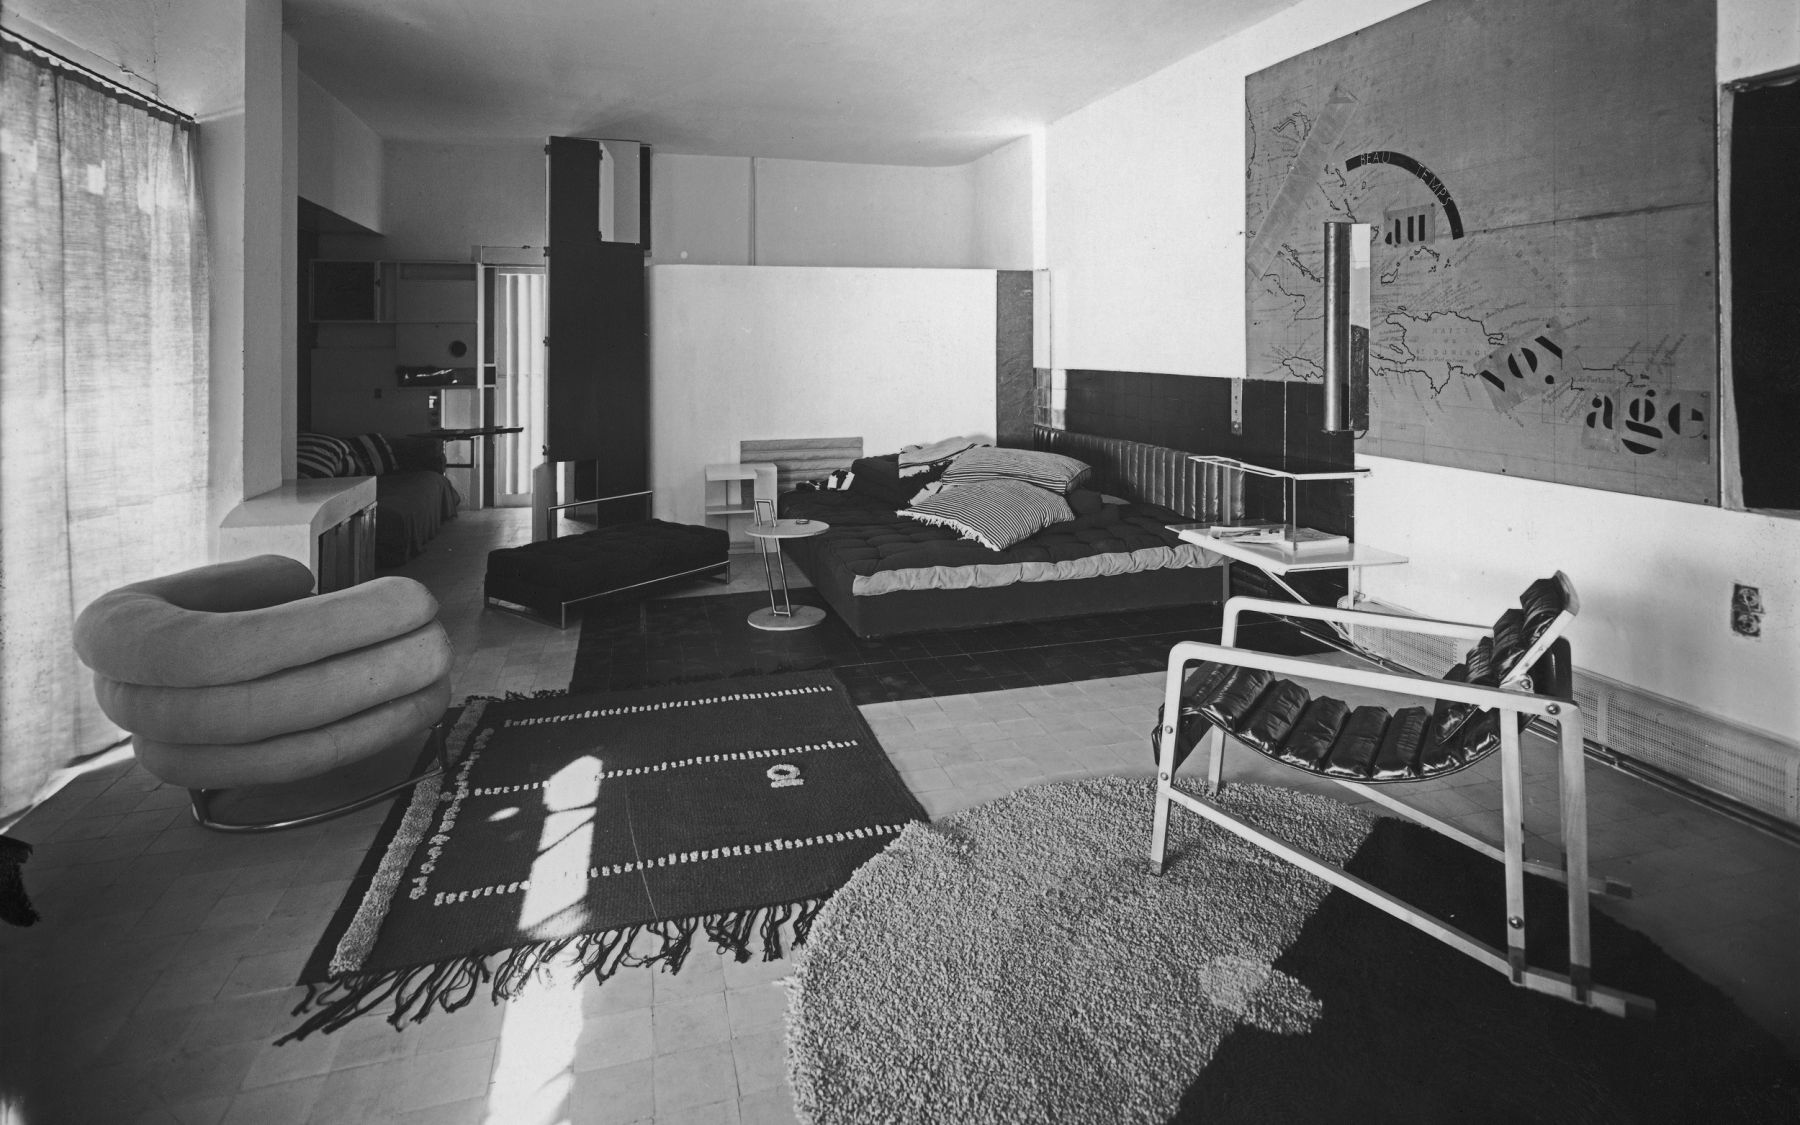 Villa E 1027 Architectural, Interior, and Furniture Designs by iconic mid-century modern designer Eileen Gray classic vintage photo | padstyle.com